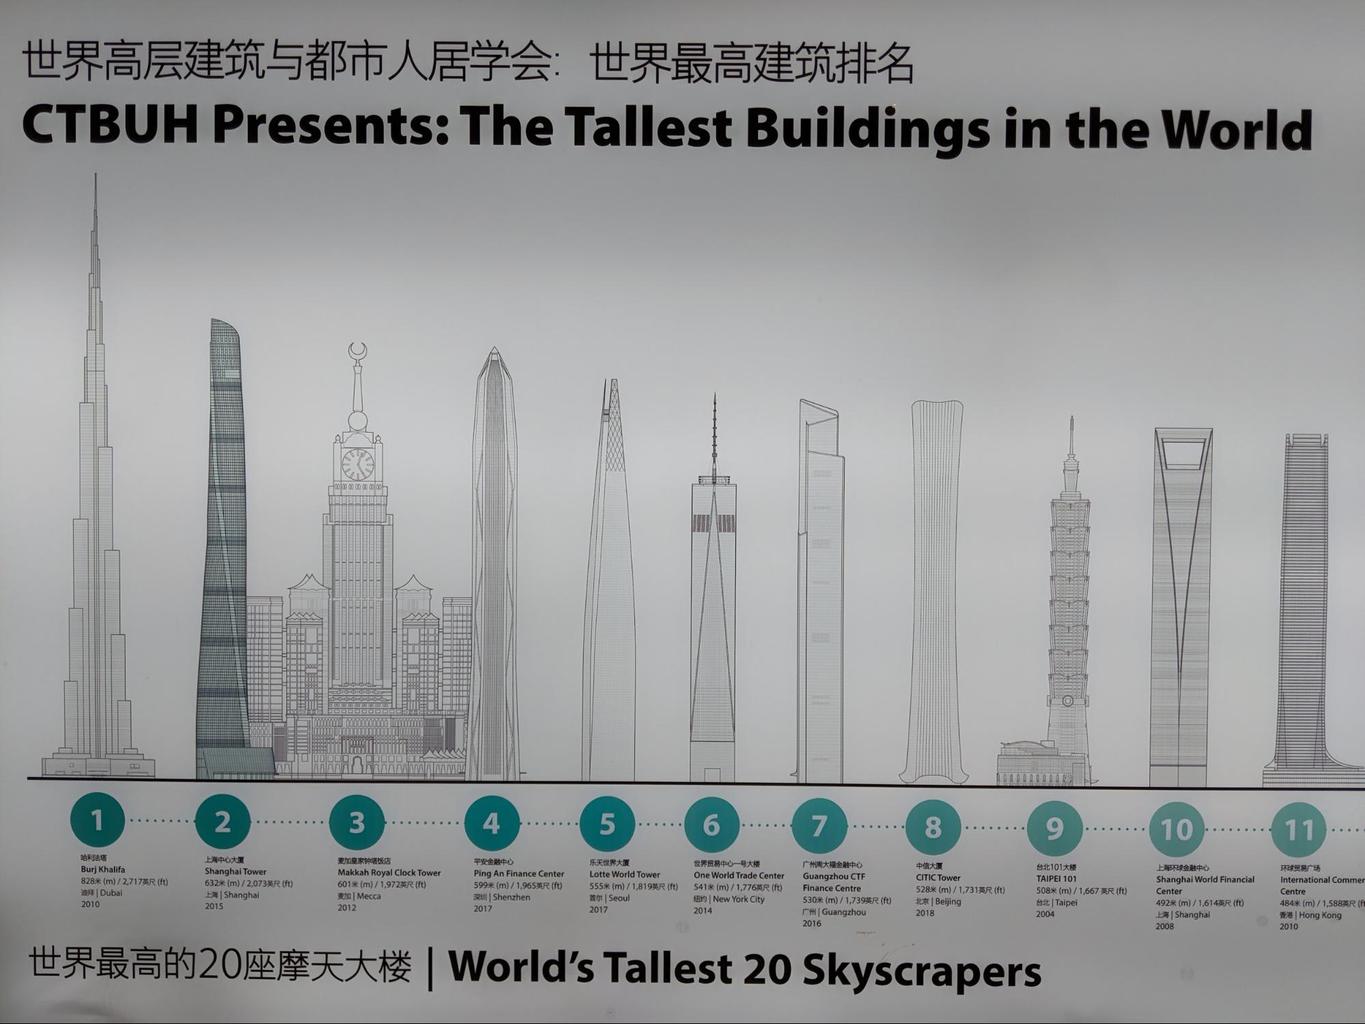 The world’s tallest skyscrapers